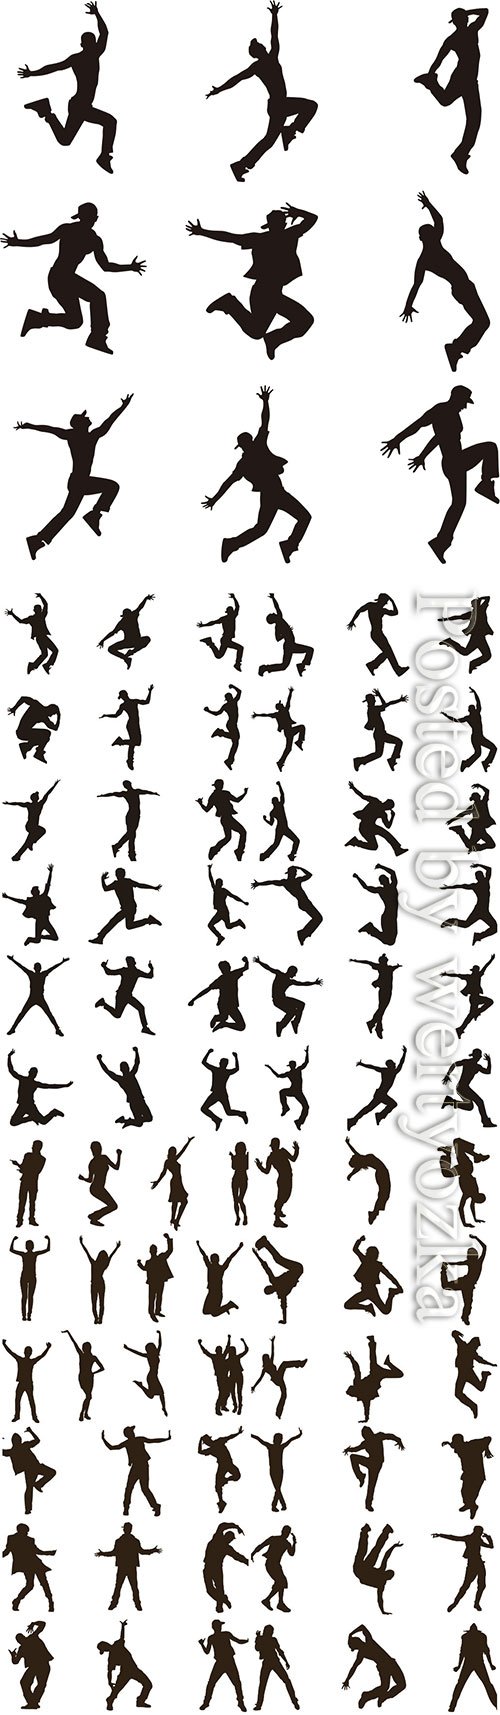 Happy people vector silhouettes